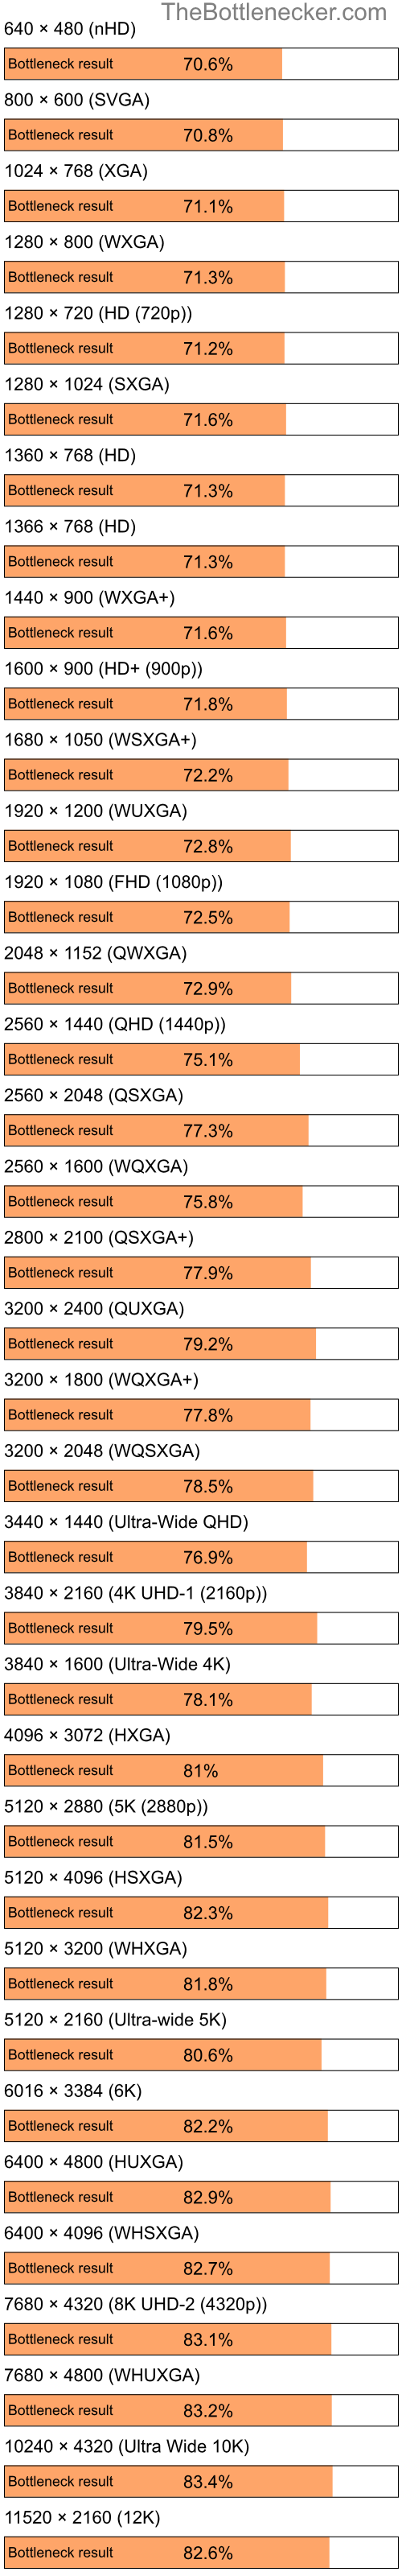 Bottleneck results by resolution for Intel Celeron M 420 and AMD Mobility Radeon HD 4225 in7 Days to Die